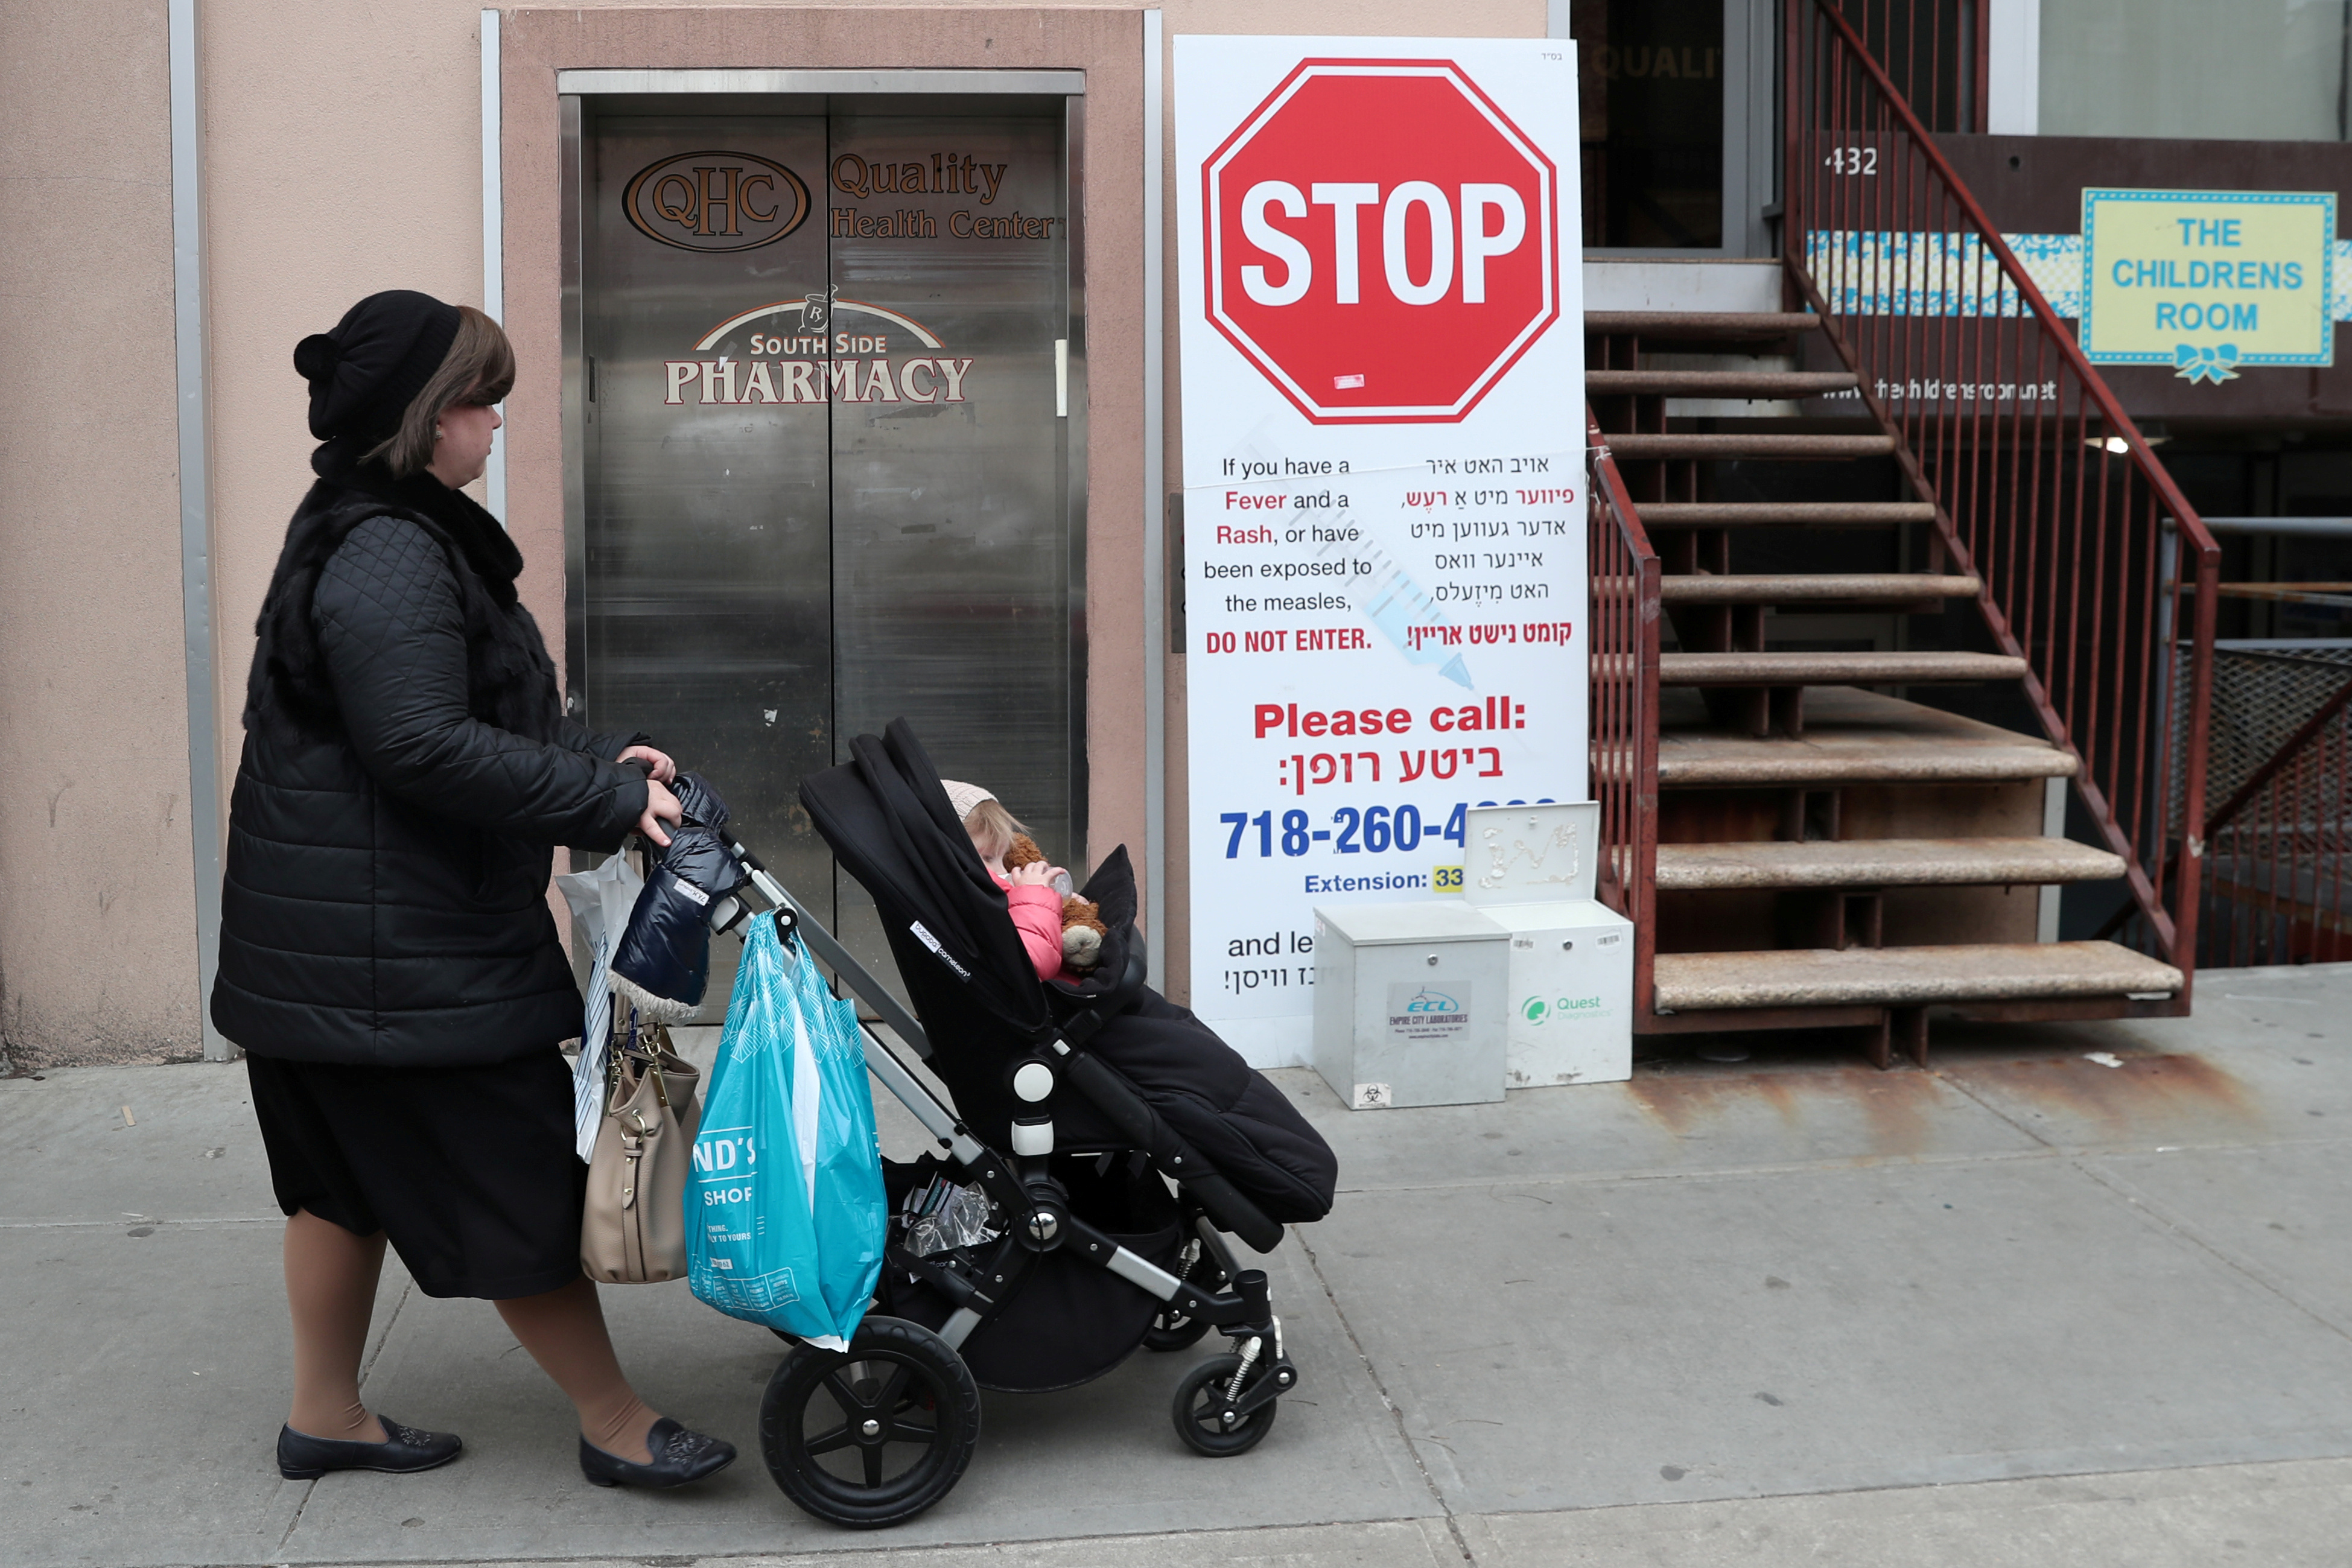 New York - U.S. Sees Surge In Confirmed Cases Of Measles, CDC Reports3898 x 2599